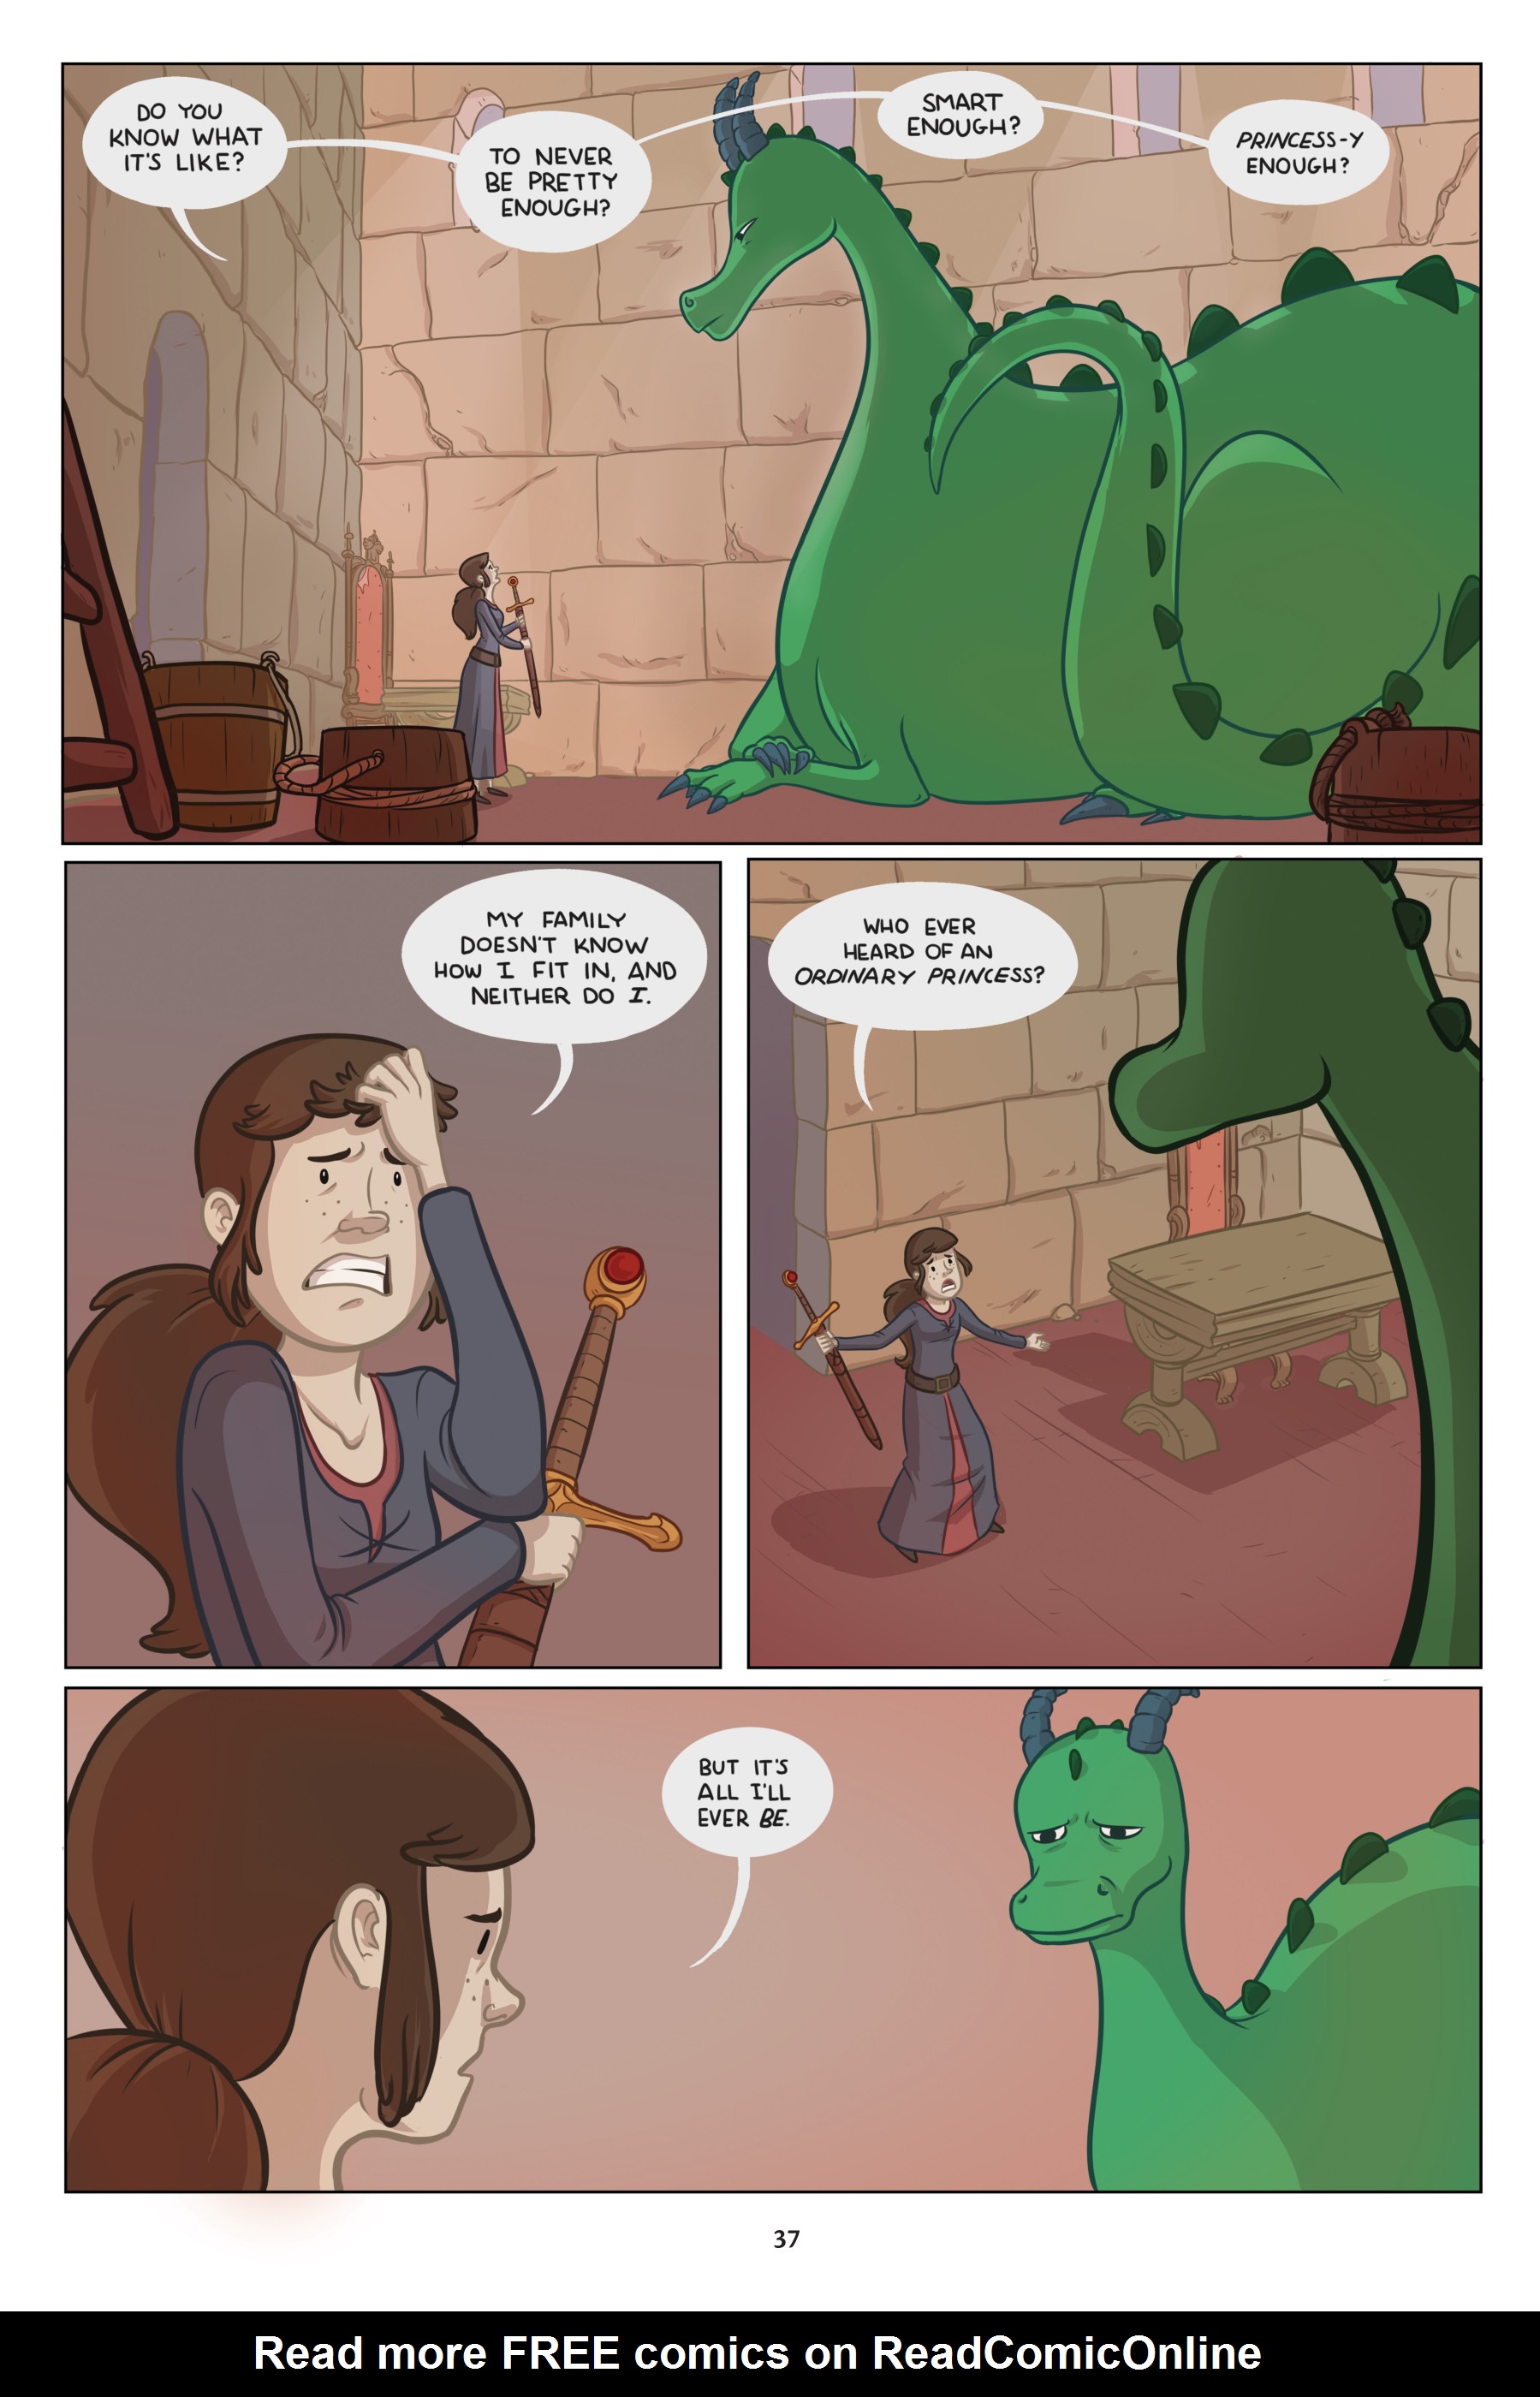 Read online Extraordinary: A Story of an Ordinary Princess comic -  Issue # TPB (Part 1) - 38